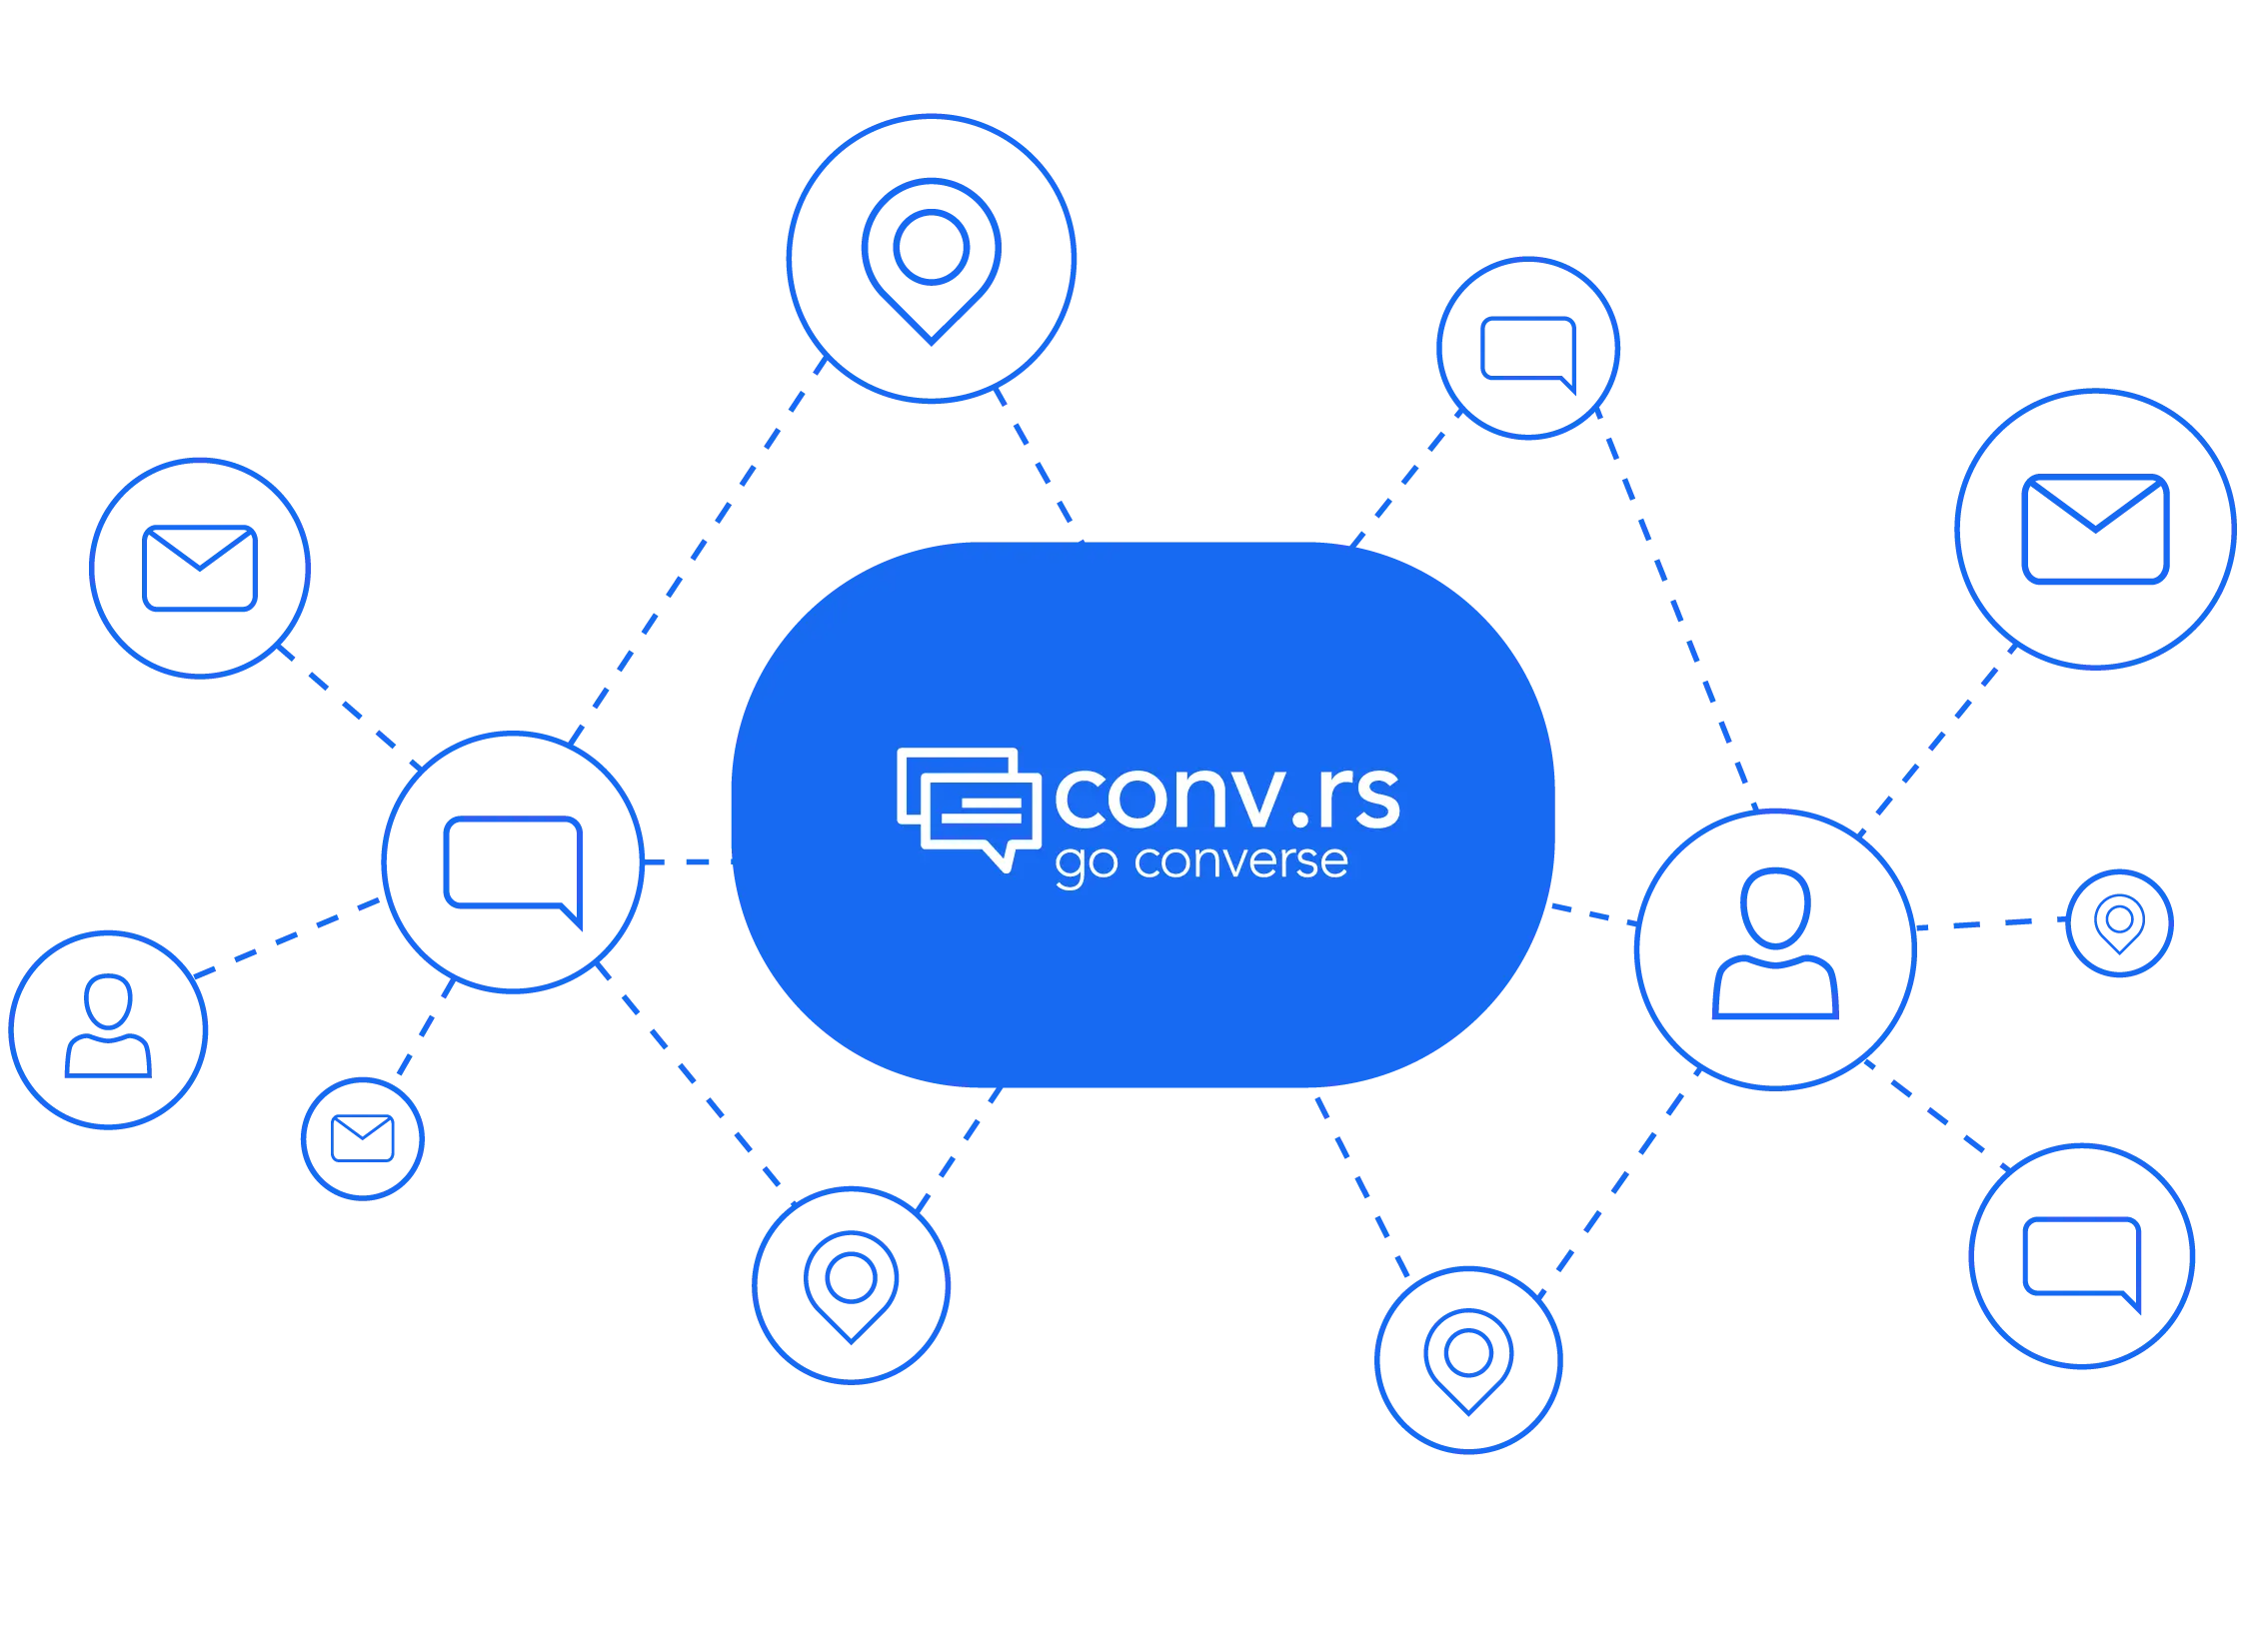 connect convrs to your
backoffice